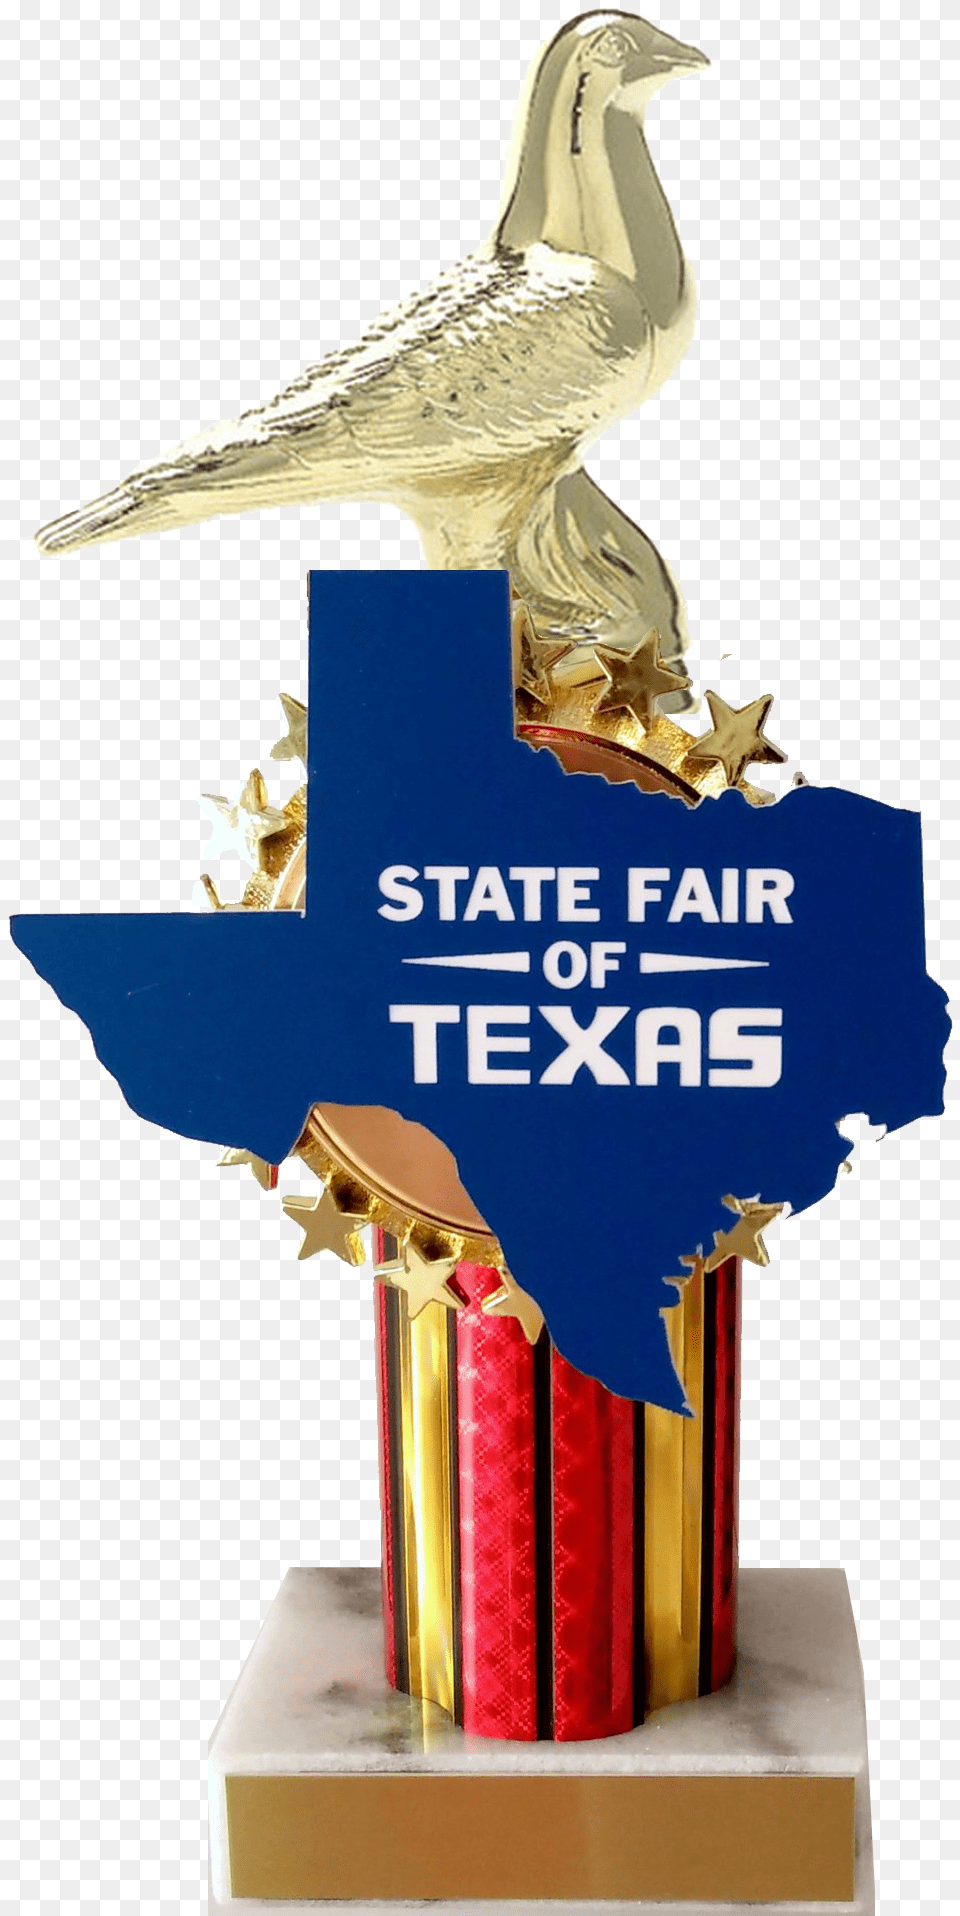 State Fair Pigeon Trophy With State Cutout Trophy Schoppy Trophy Pigeon, Animal, Bird Png Image